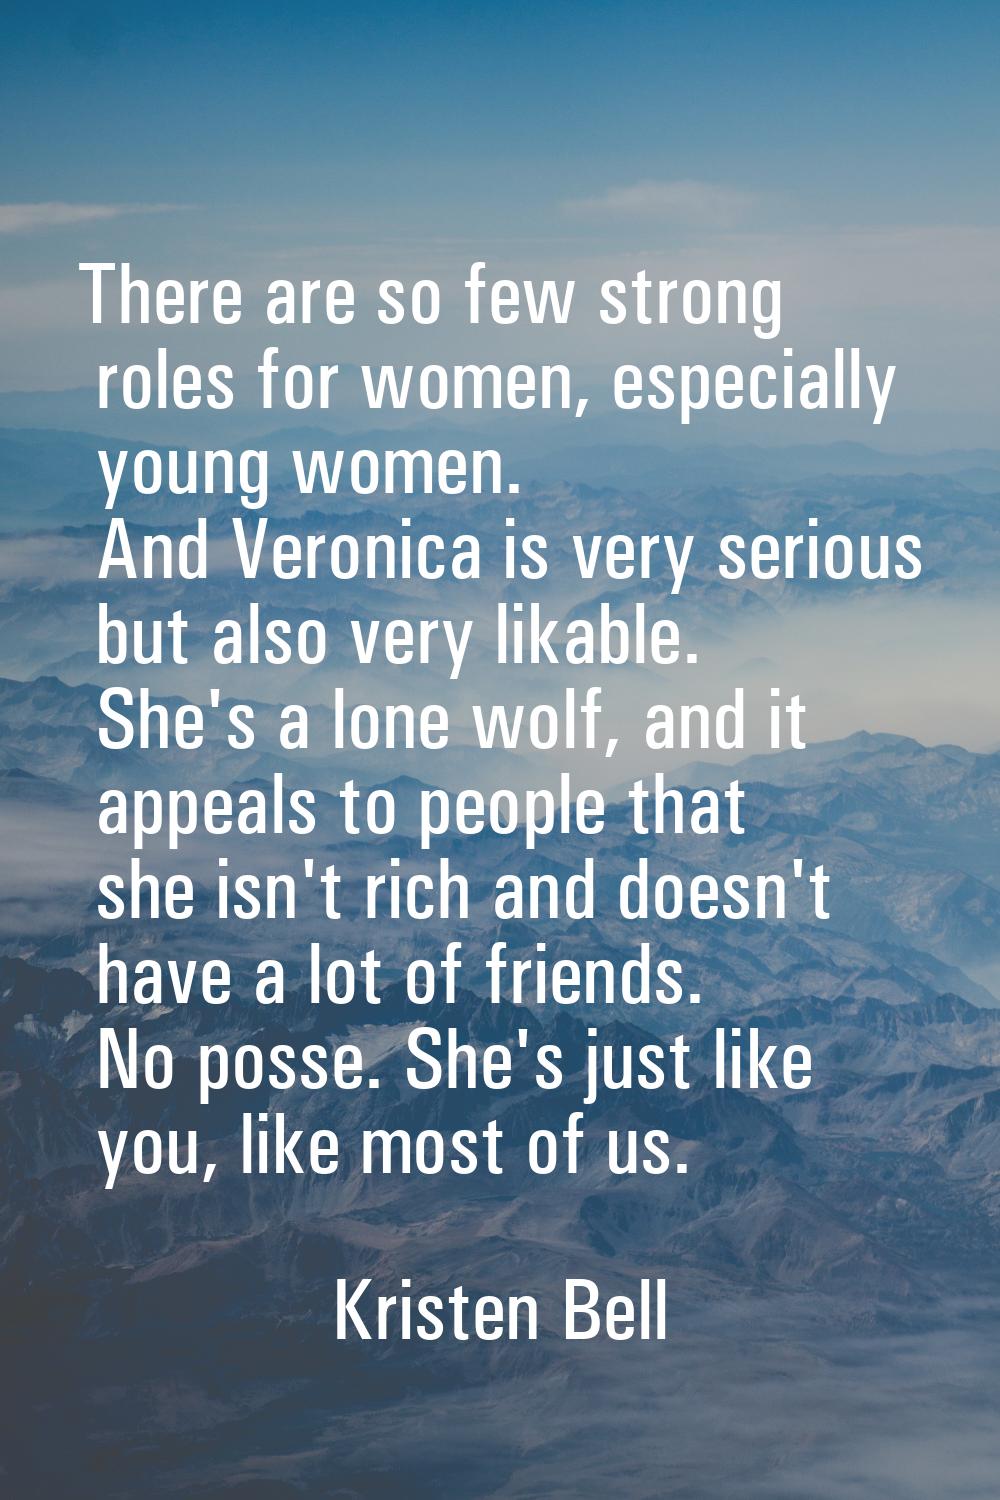 There are so few strong roles for women, especially young women. And Veronica is very serious but a